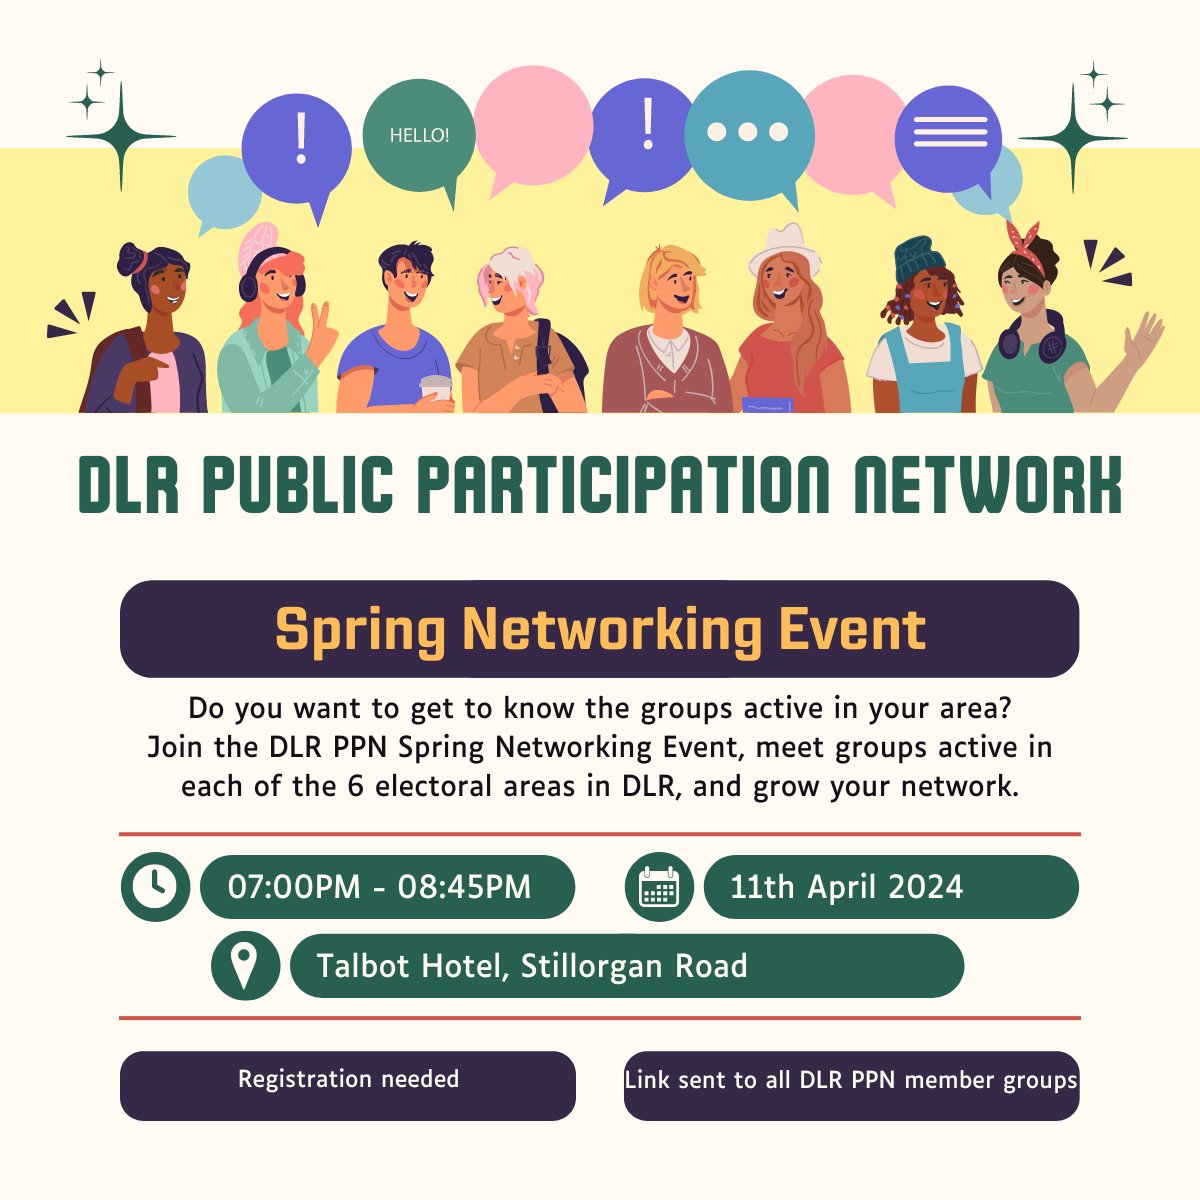 Do you want to get to know the groups active in your area? Join the DLR PPN Spring Networking Event, meet groups active in each of the 6 electoral areas in DLR, and grow your network. Registration is needed, and the link has been sent to all our member groups. #dlr #ppn #EVENT